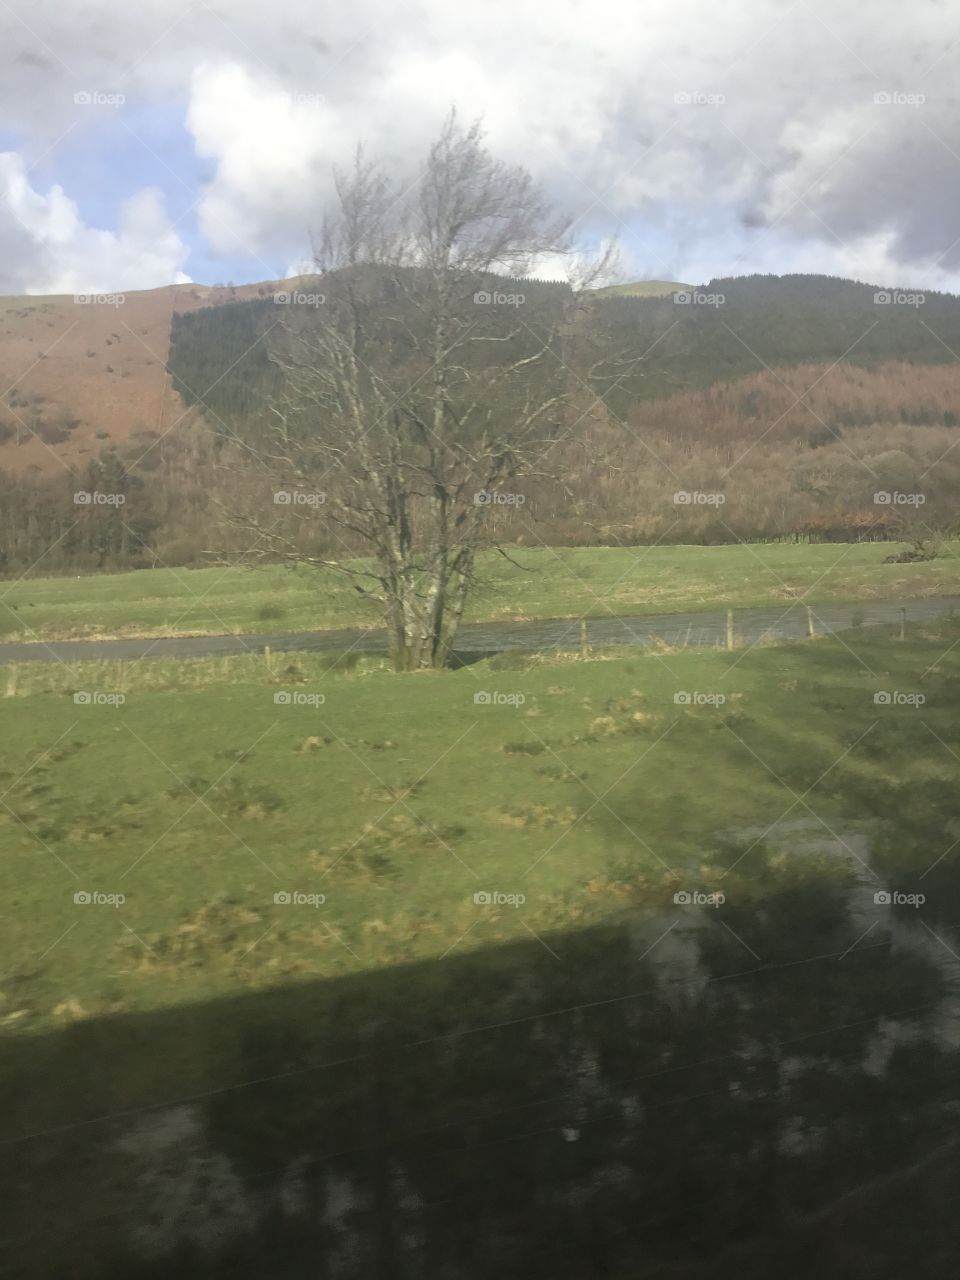 Wales from a train